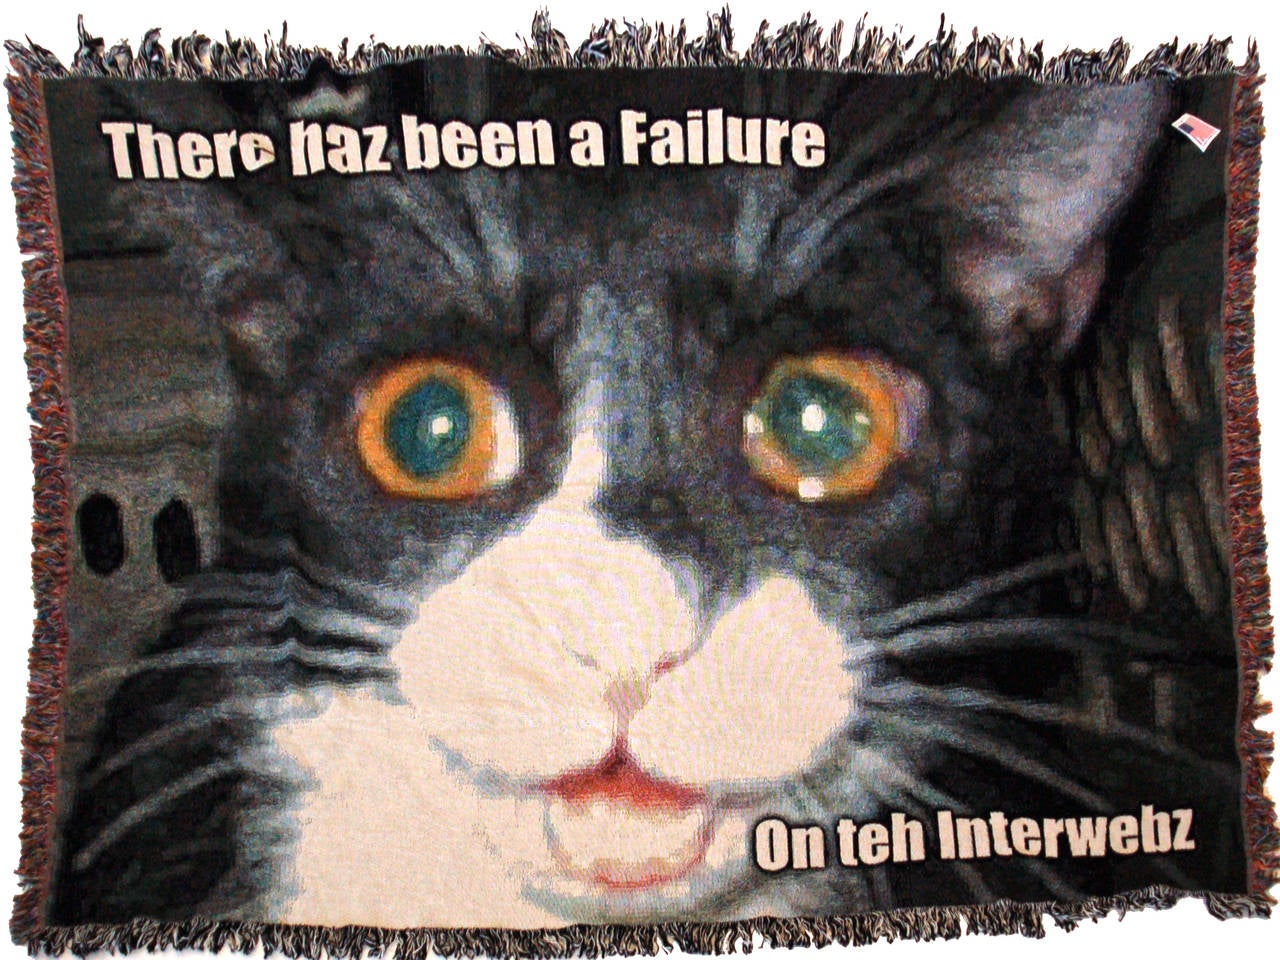 There has been a failure on teh Interwebz